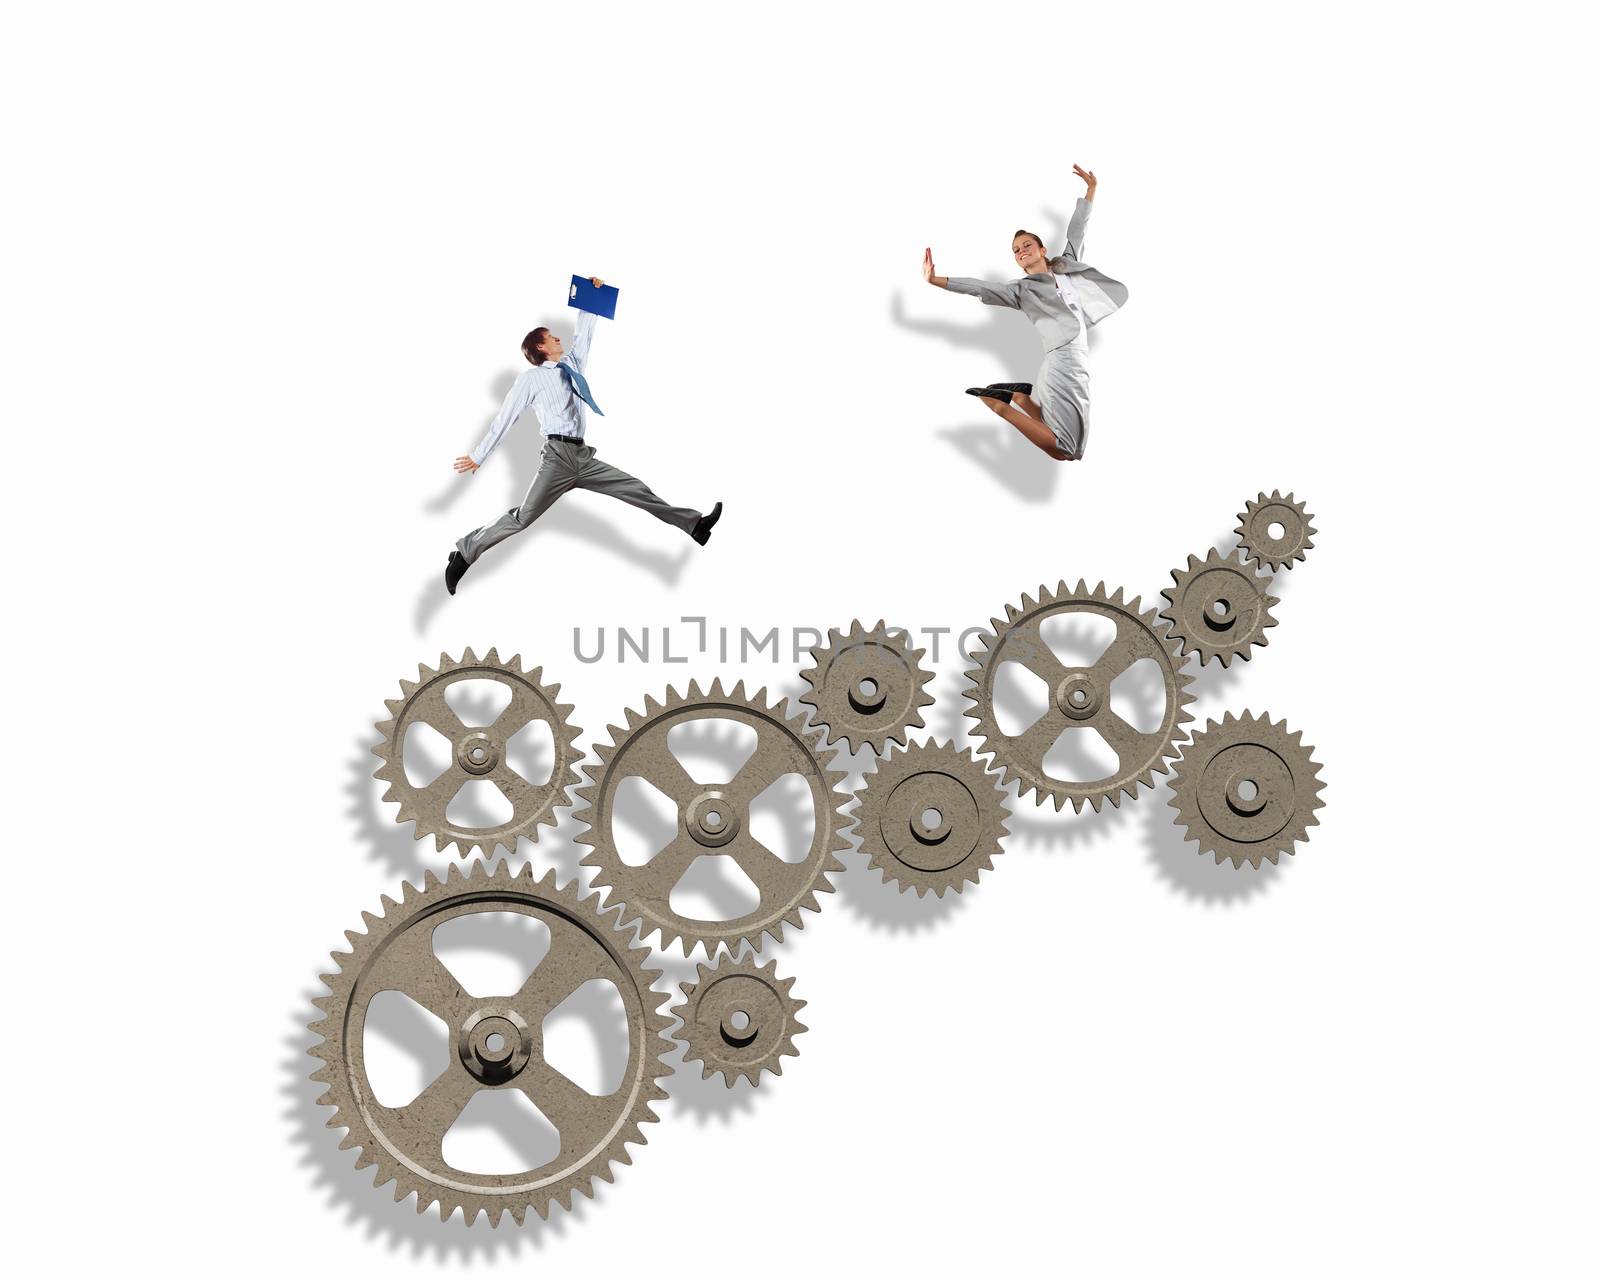 Businessman and businesswoman with cog wheel elements. Organization concept